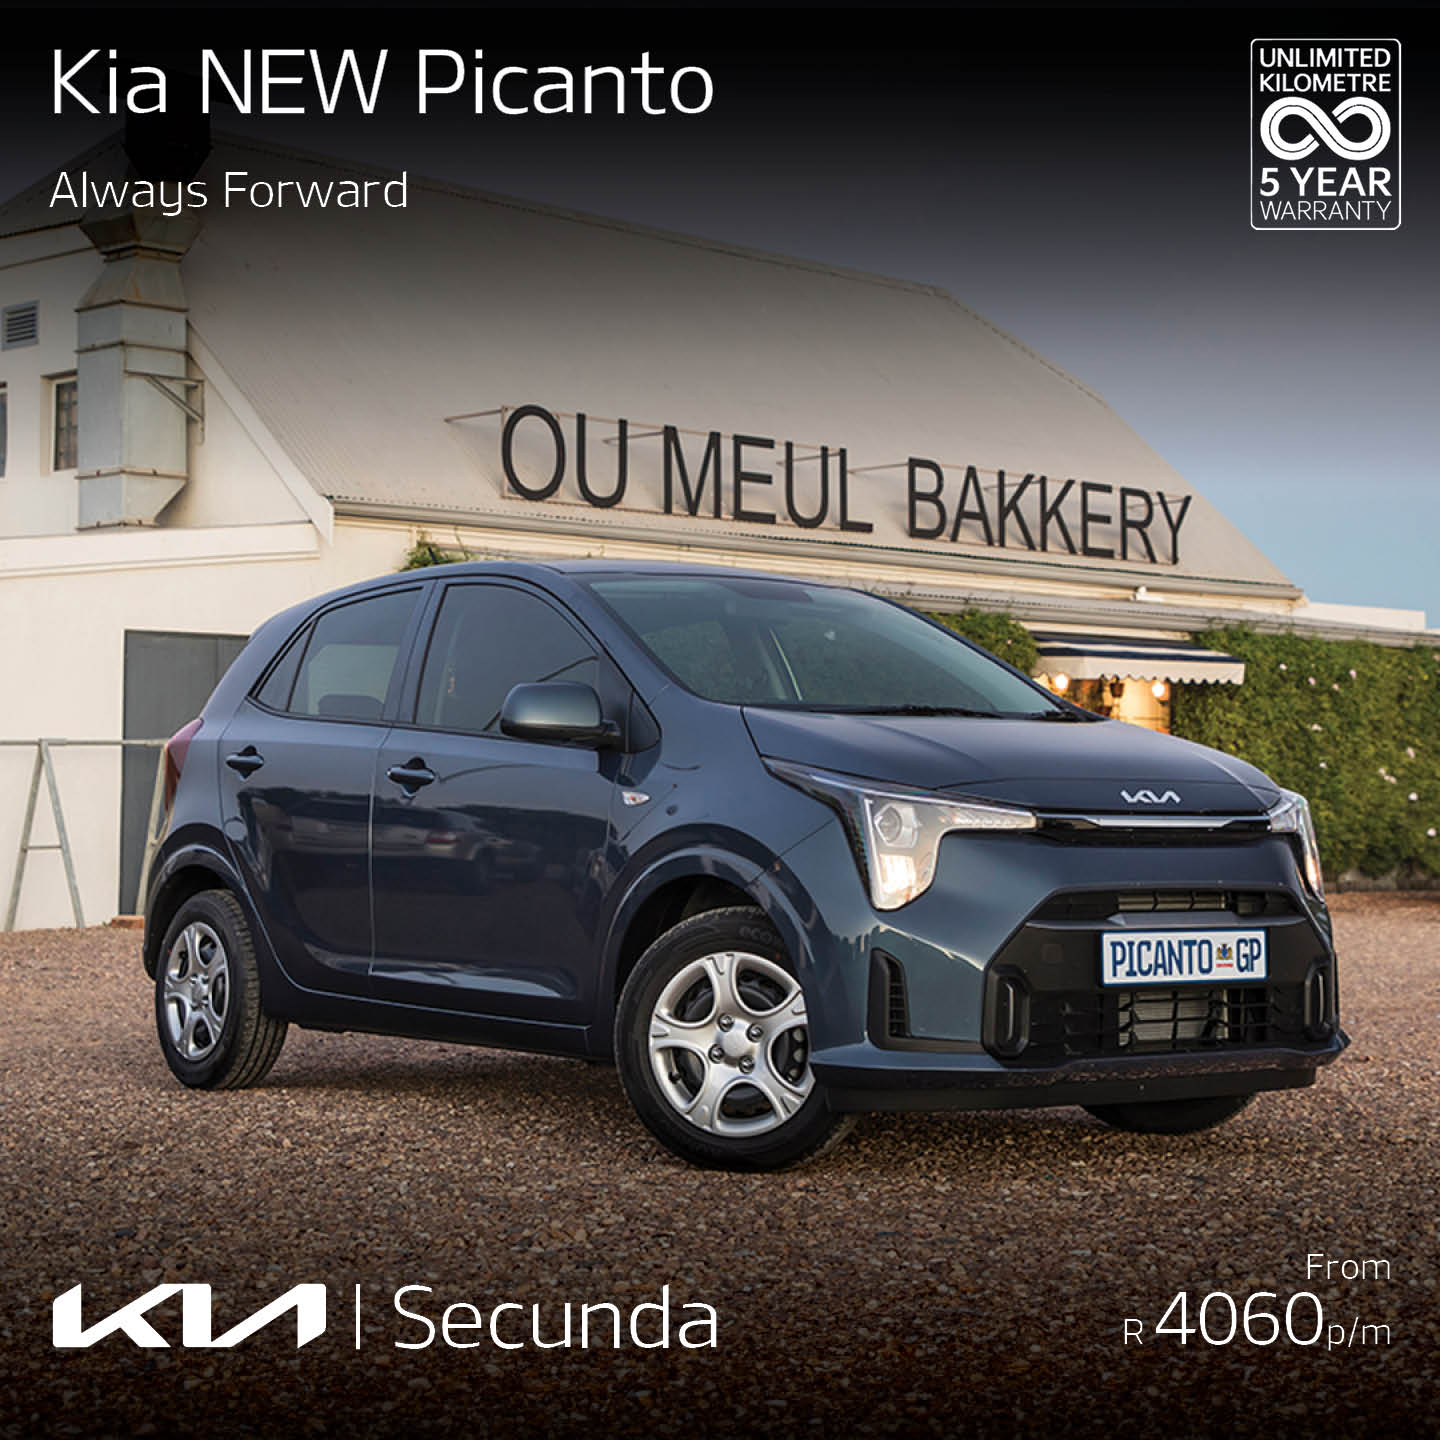 ALWAYS Fordward with the NEW KIA PICANTO image from 